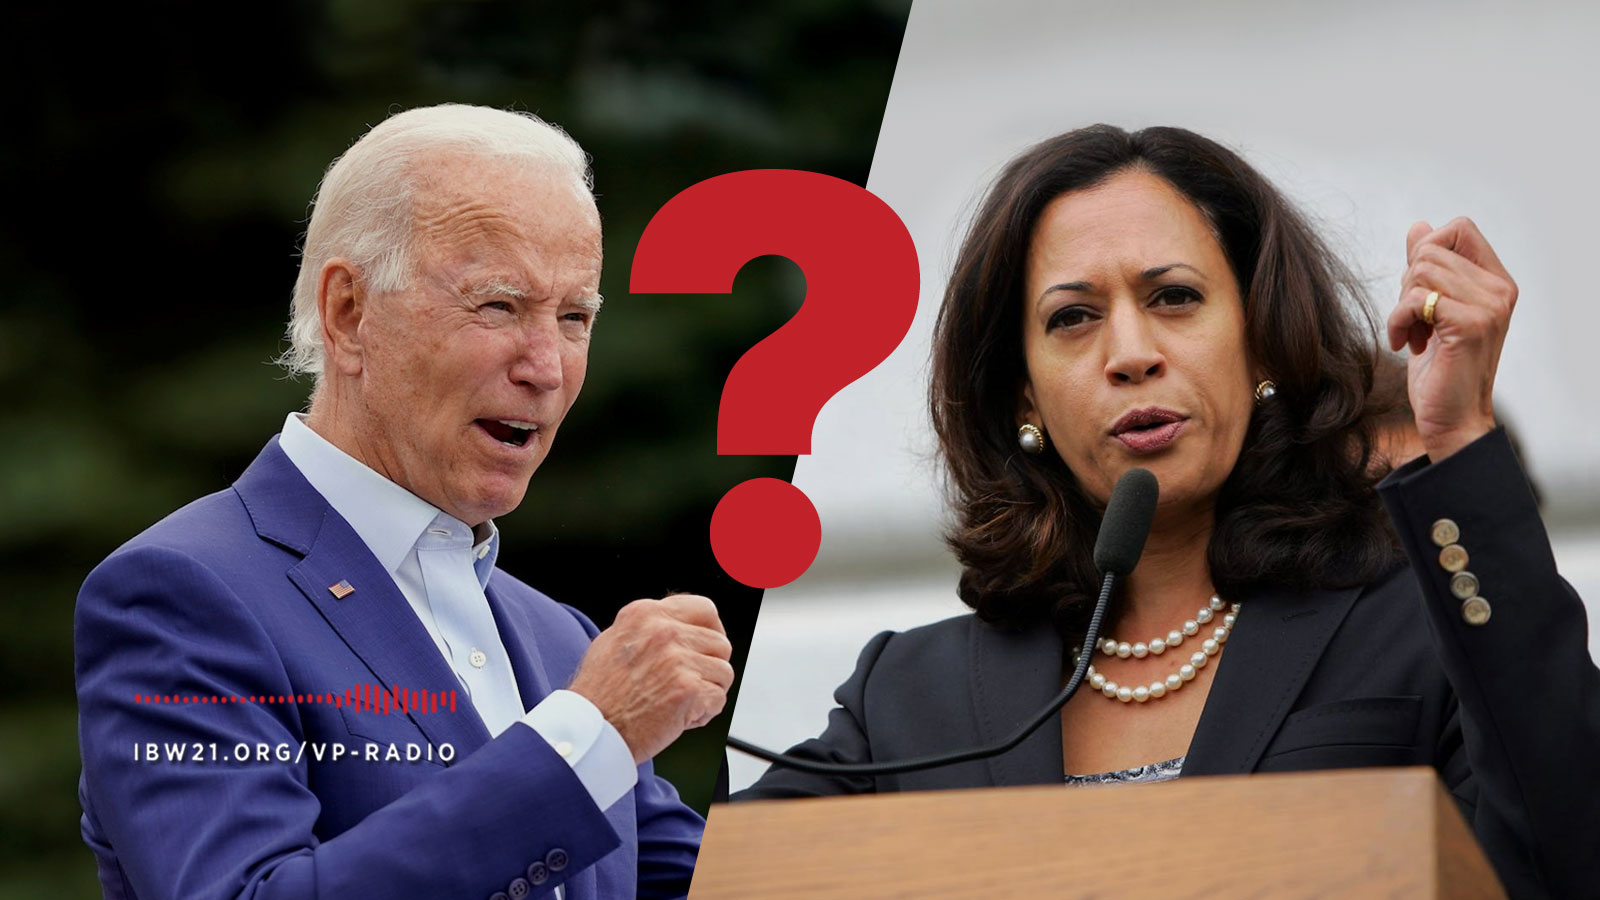 Vantage Point: Riding with Biden or Rallying Around Kamala – Which Way forward for Democrats?